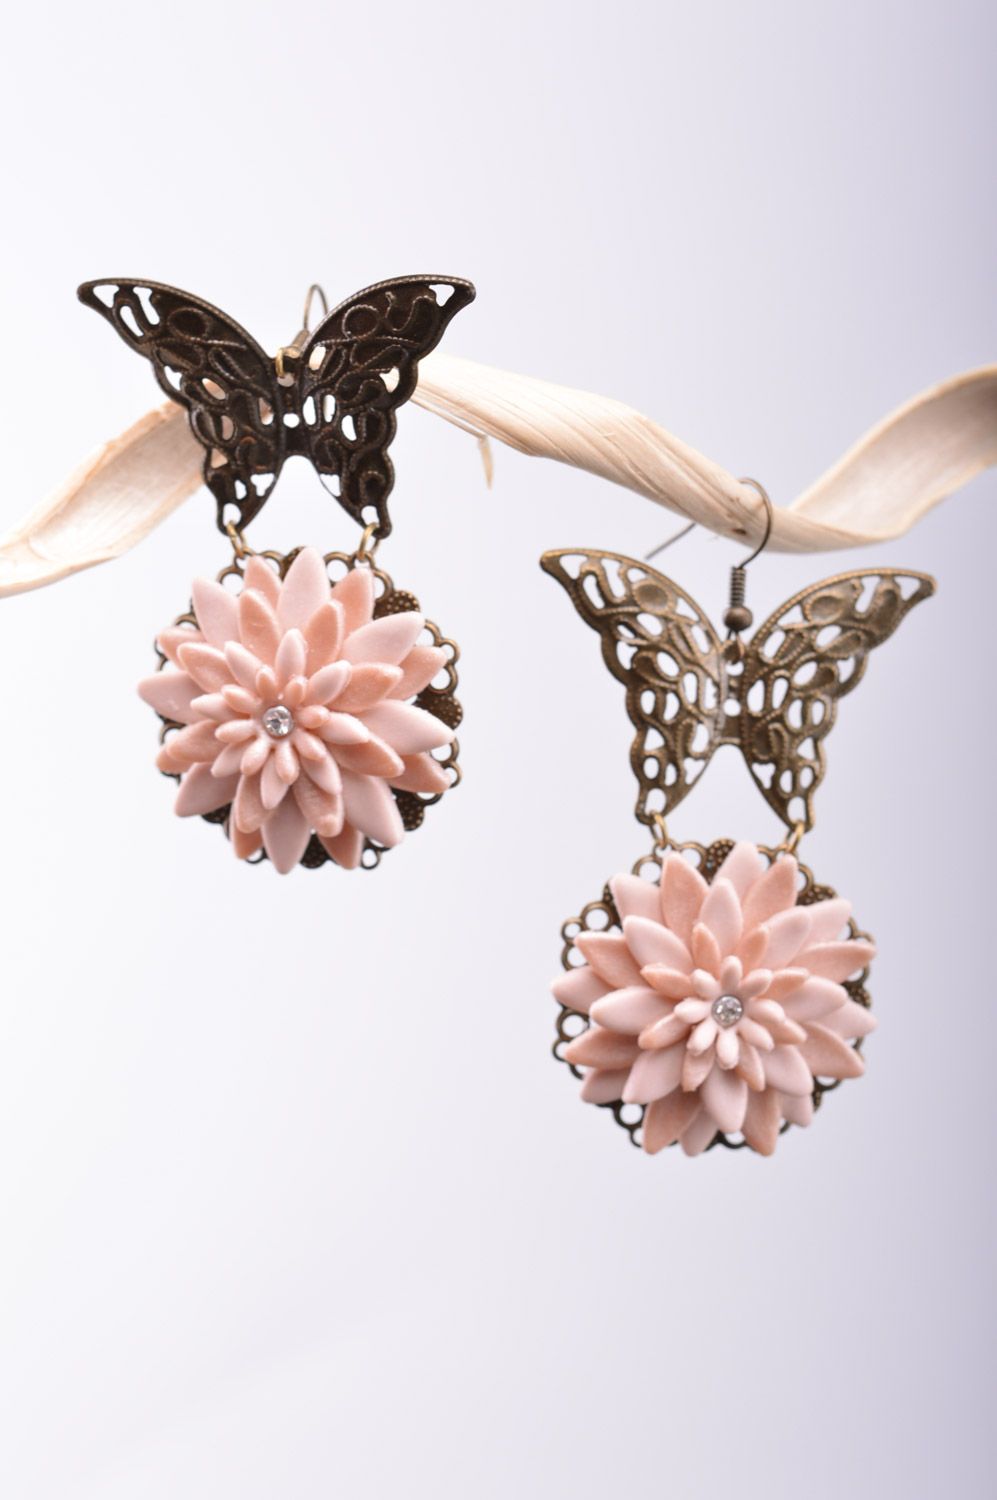 Handmade women's plastic earrings with charms in the shape of butterflies on aster flowers photo 2